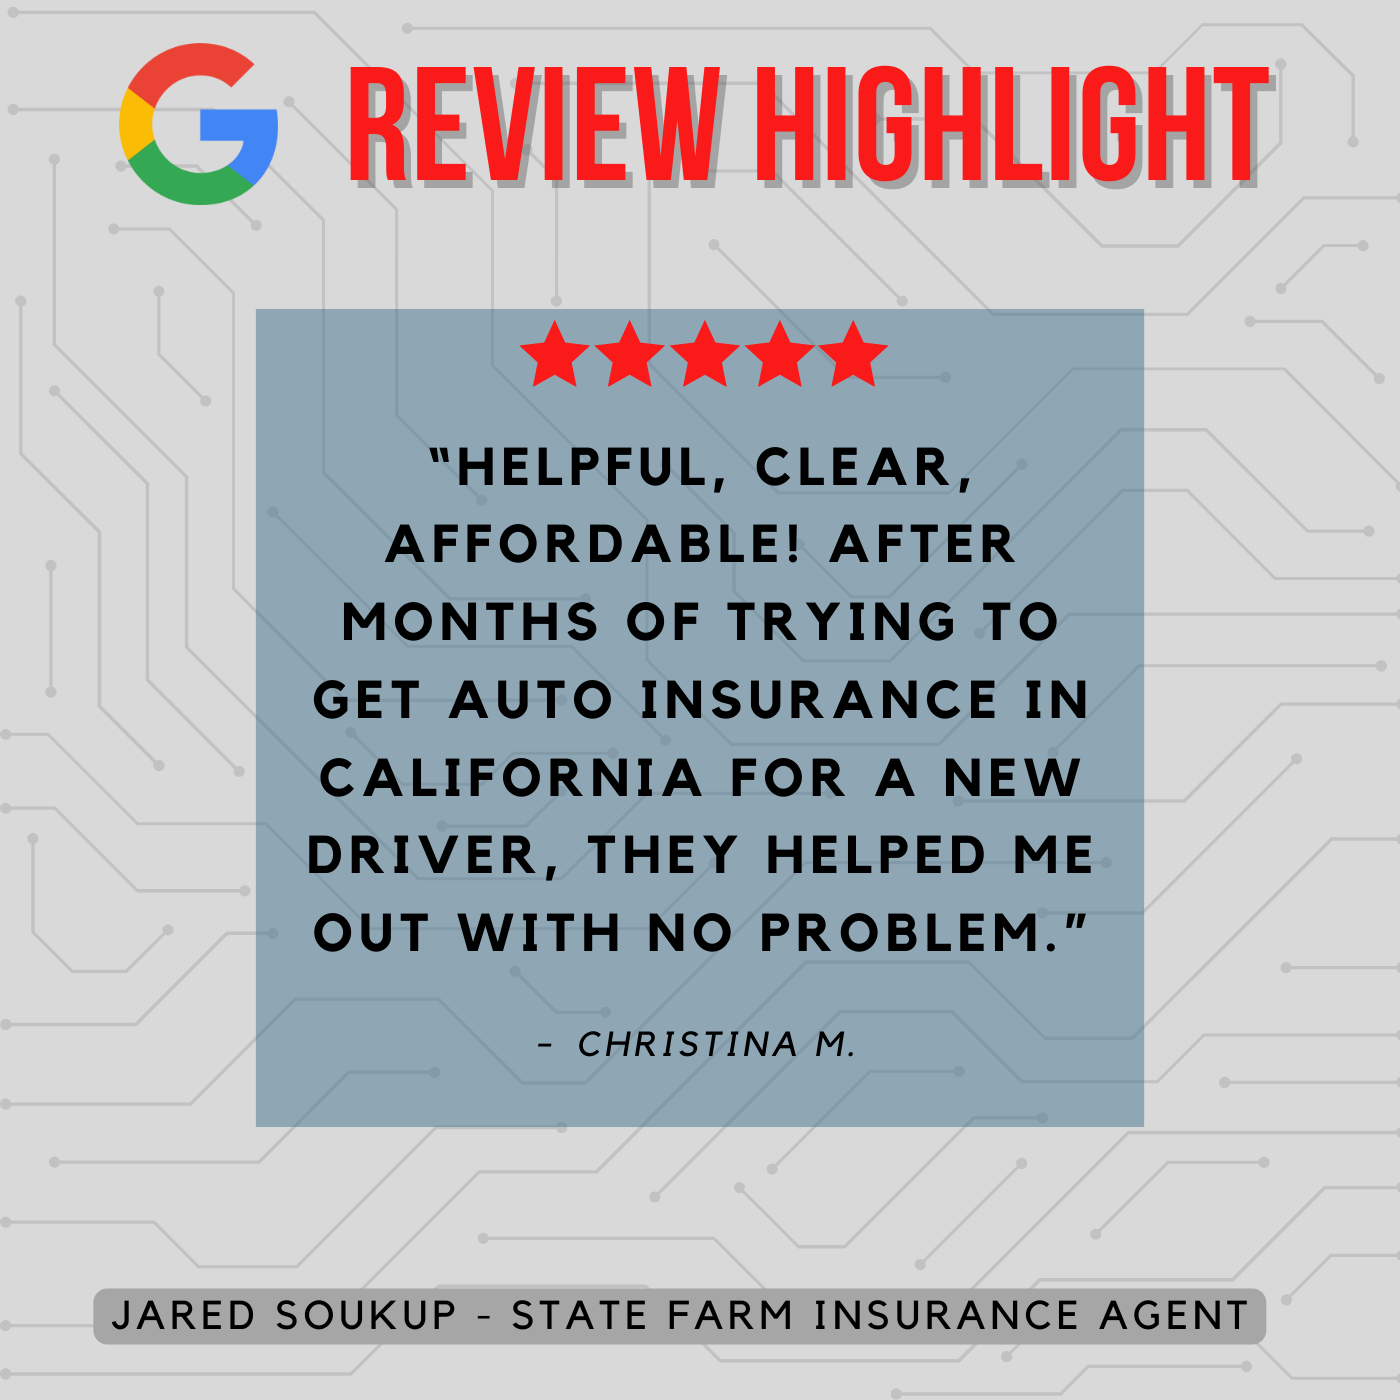 Jared Soukup - State Farm Insurance Agent
Review highlight